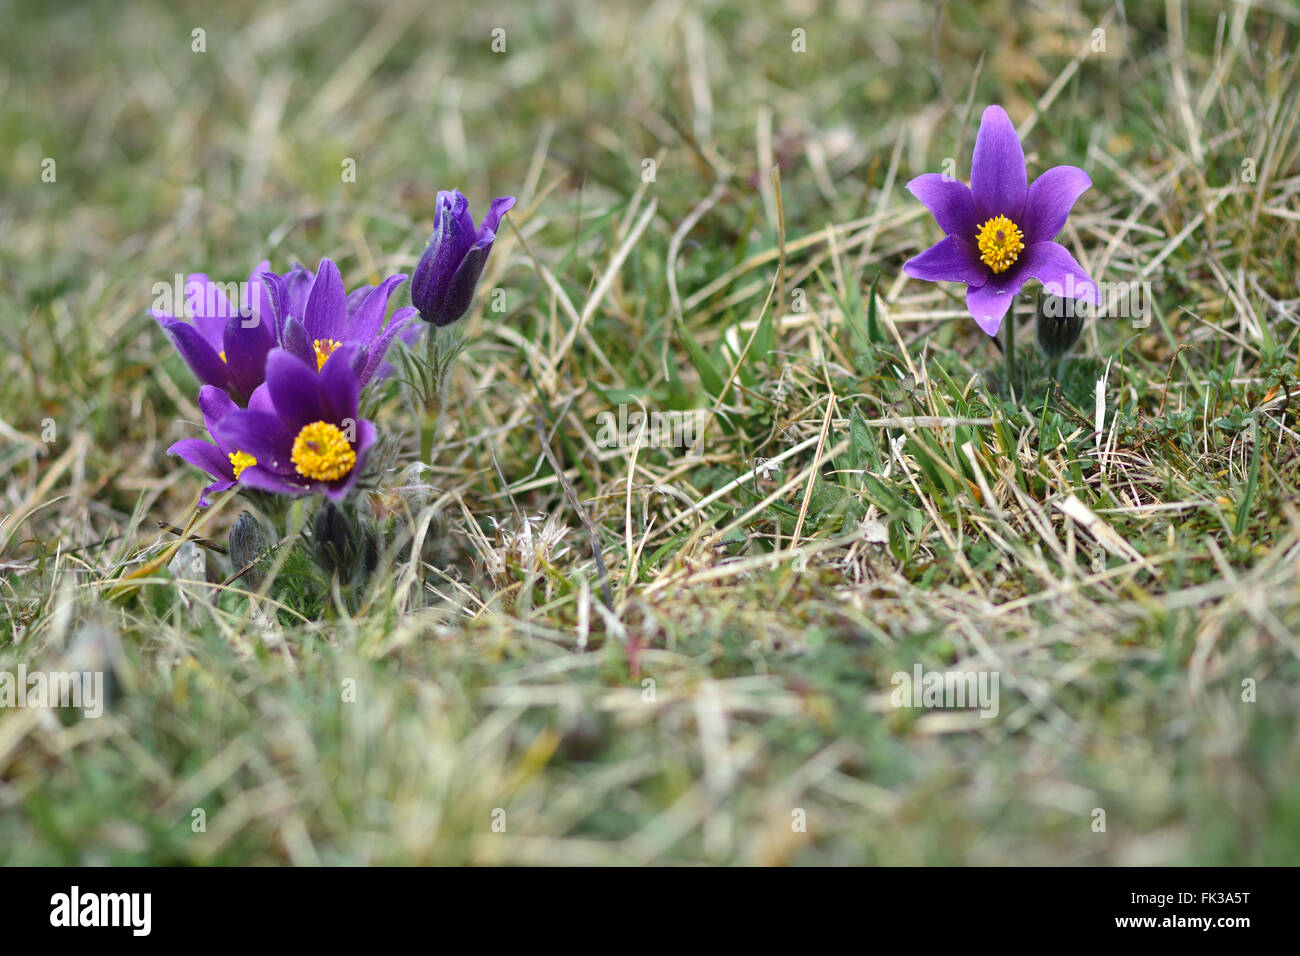 Pasque flower (Pulsatilla vulgaris). Rare plant of calcareous grassland in the buttercup family (Ranunculaceae), in flower Stock Photo